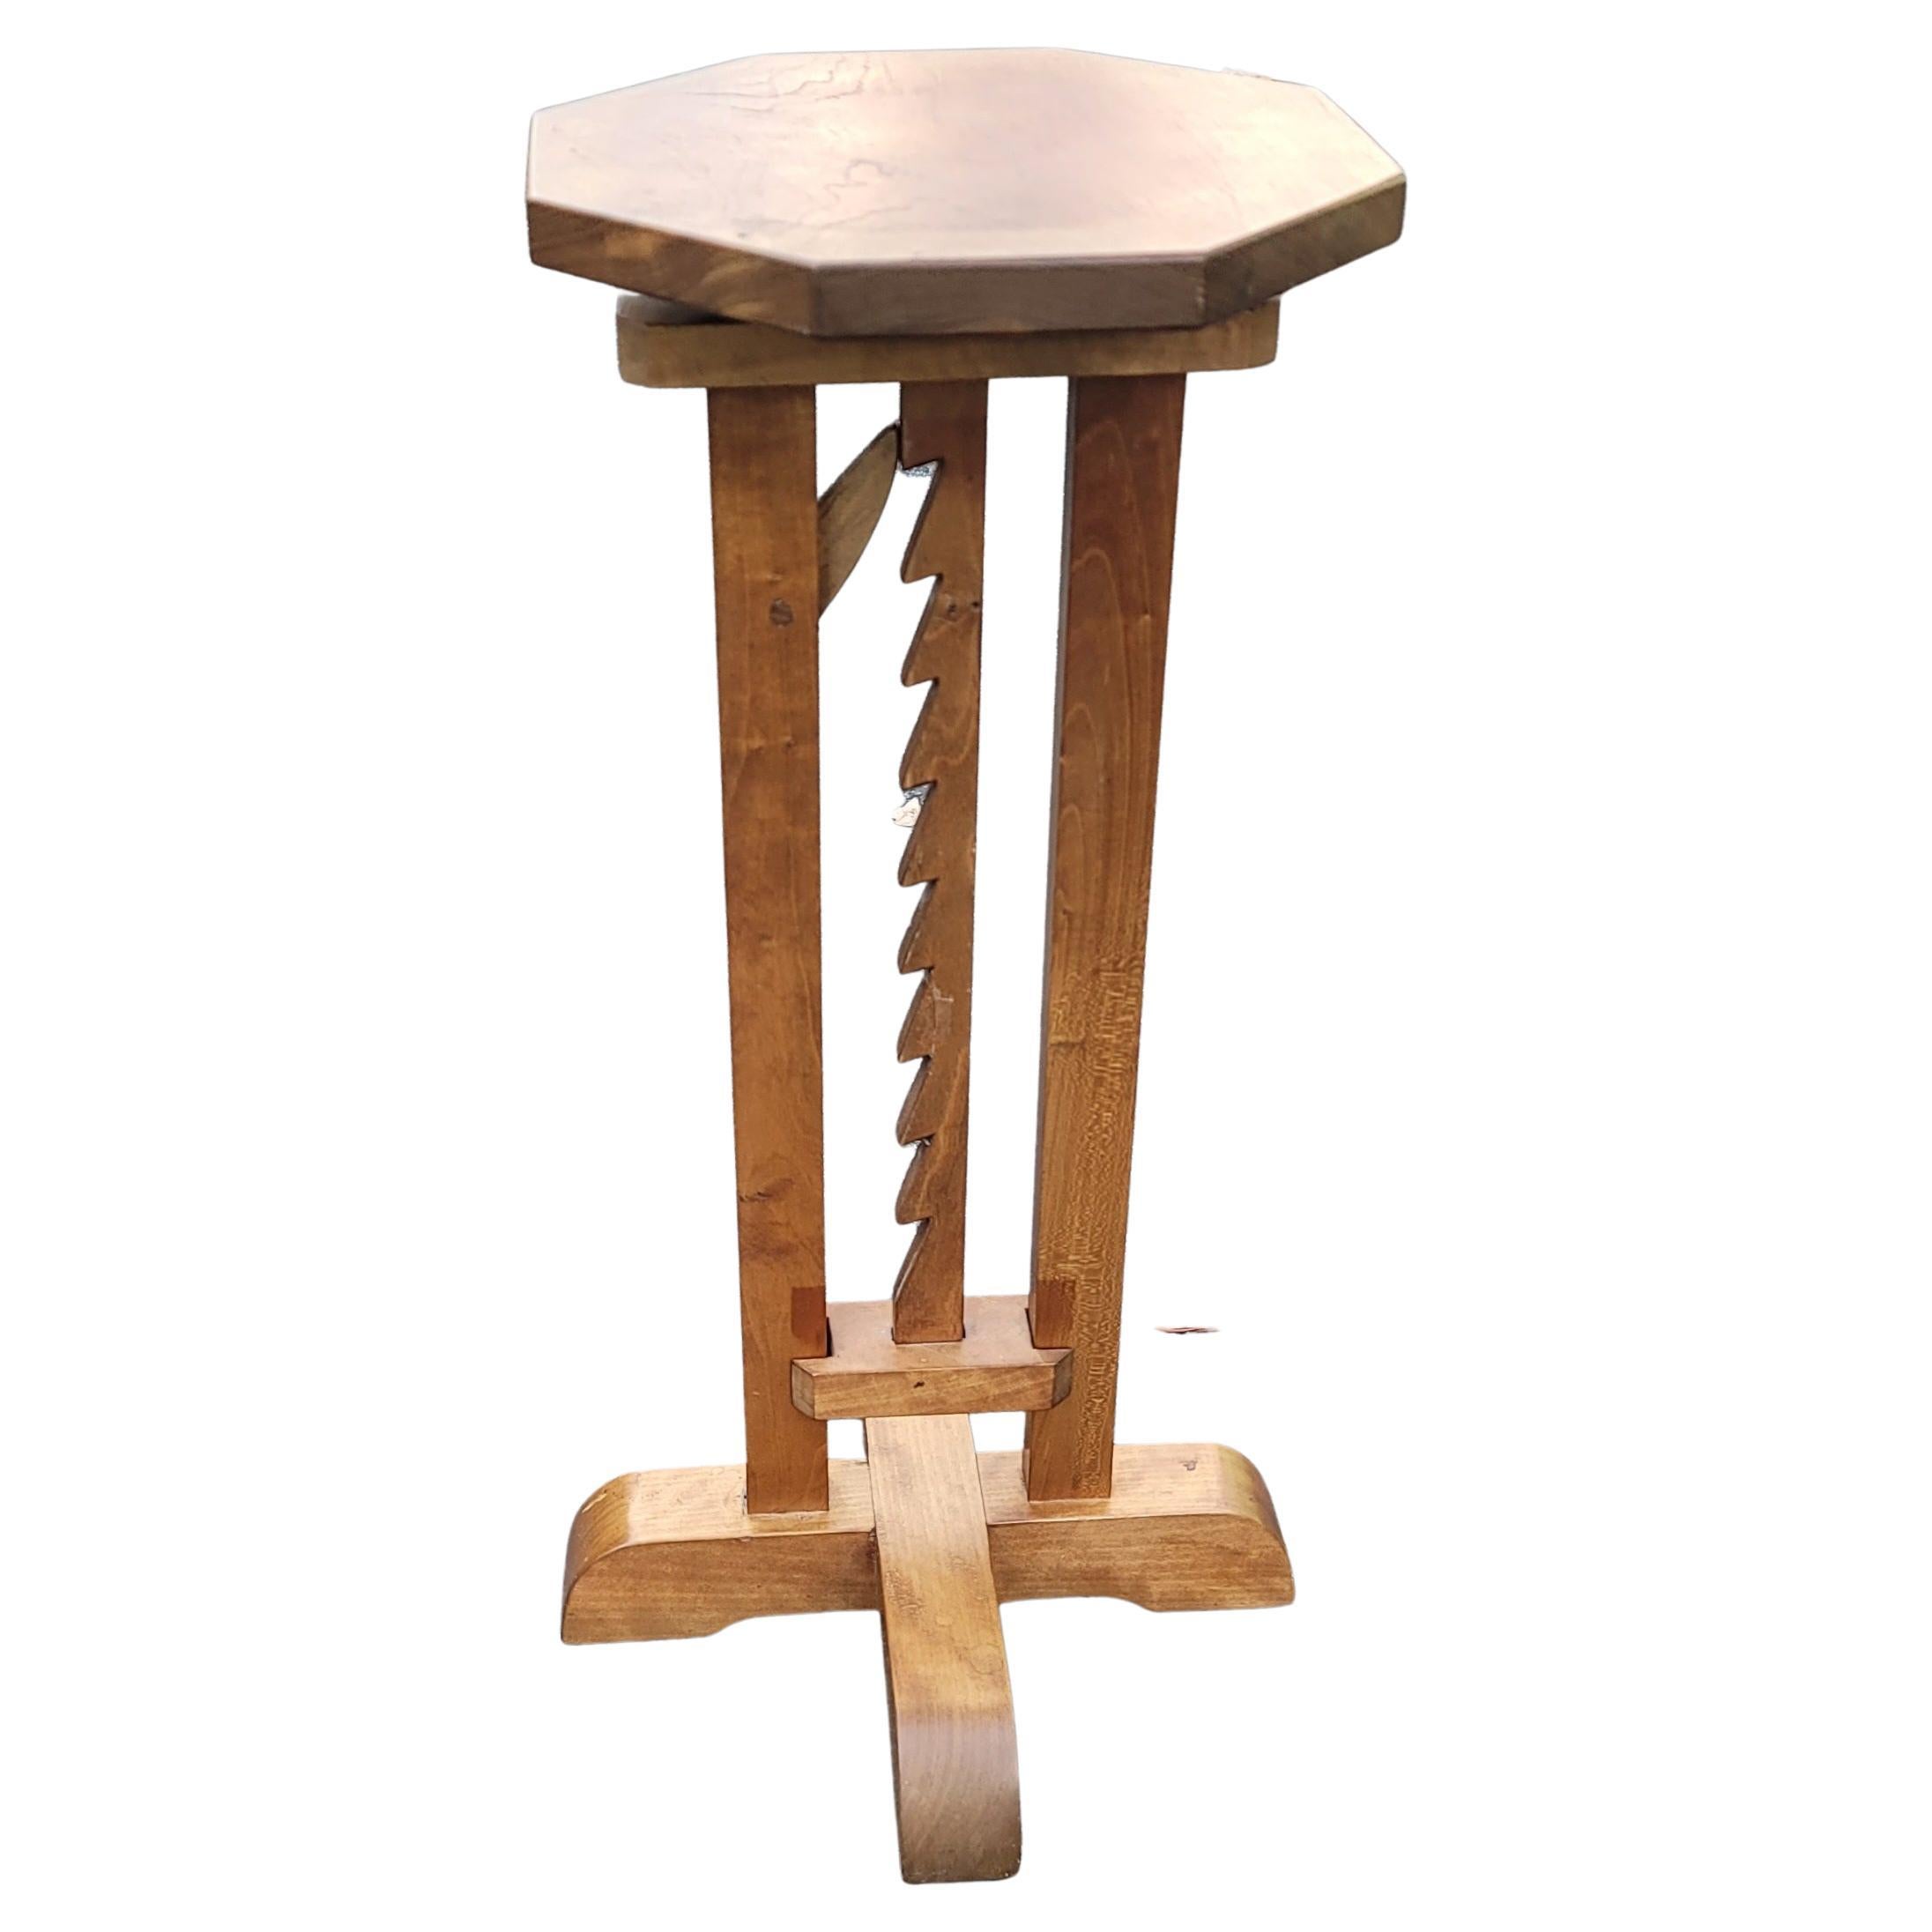  A rare pilgrim century X-base adjustable height candle stand fromthe late 19th century, New England. The octogonal top on a rectangular trammel cut post adjusts on wood ratchet.  Base is 11